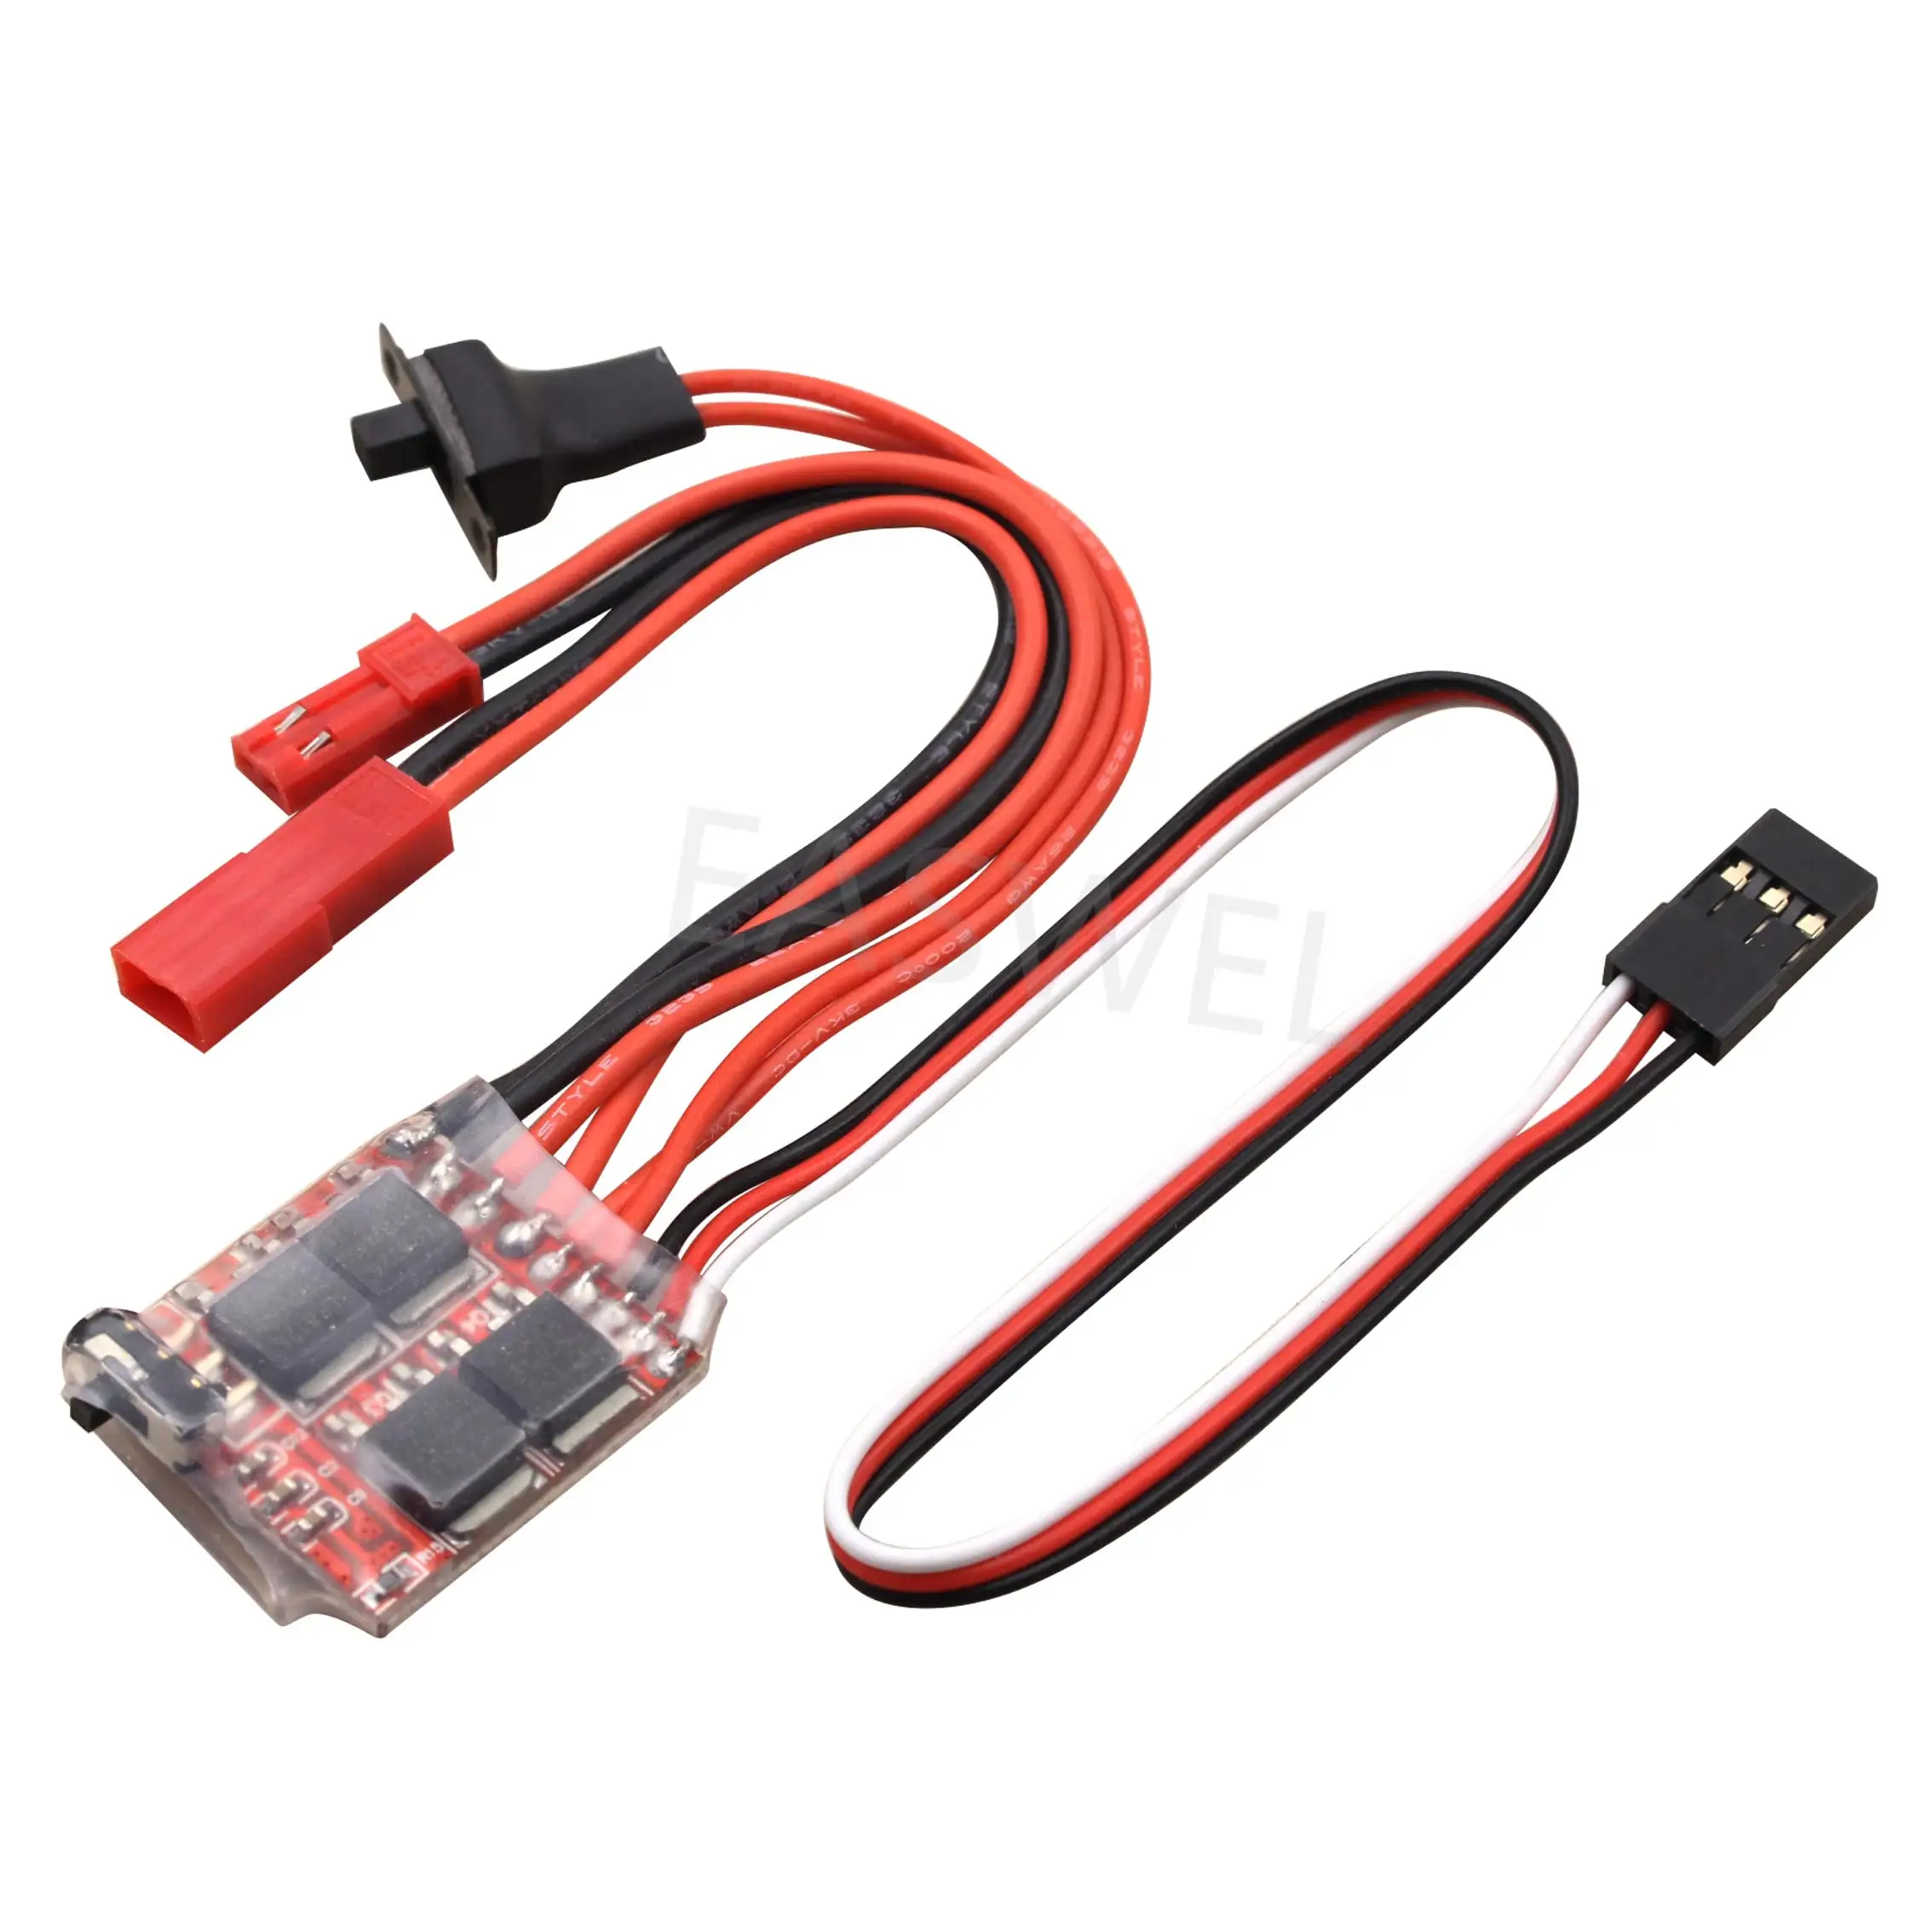 Details about   RC ESC Brush Motor Speed Controller w/ Brake For RC Parts Boat Car Tank U8Q7 